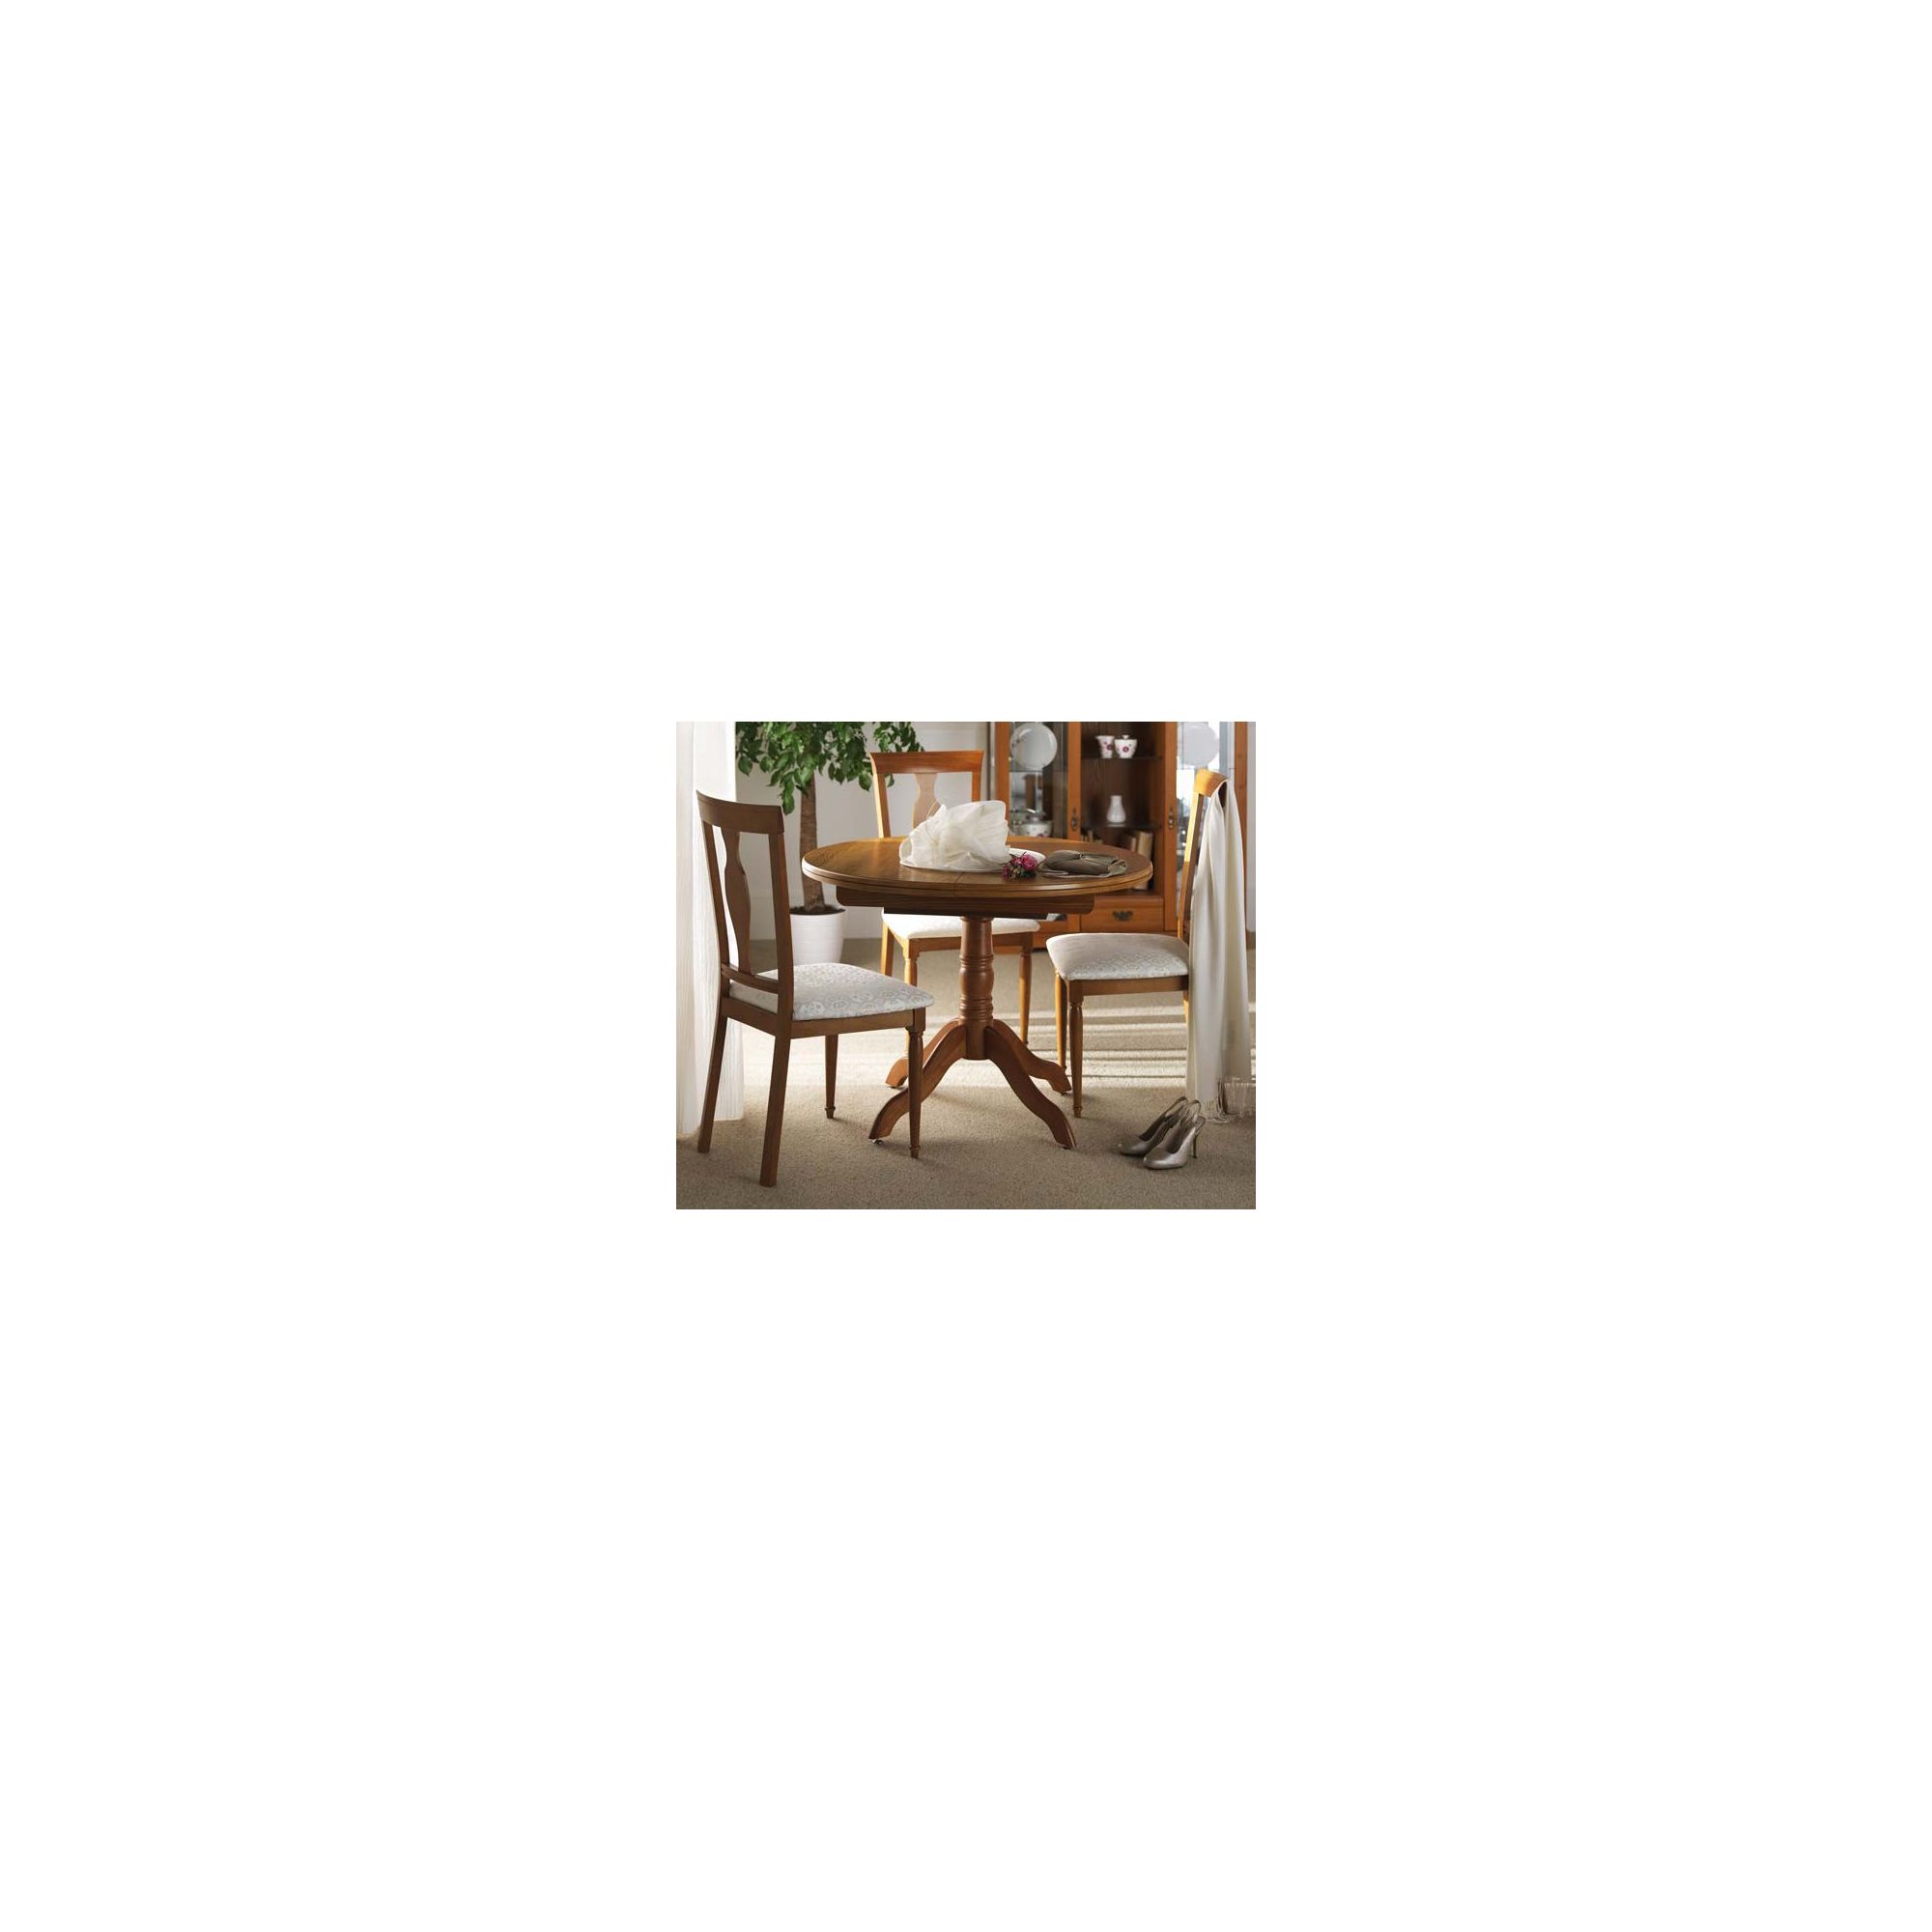 Caxton Canterbury 4 Chair Dining Set in Golden Chestnut at Tesco Direct